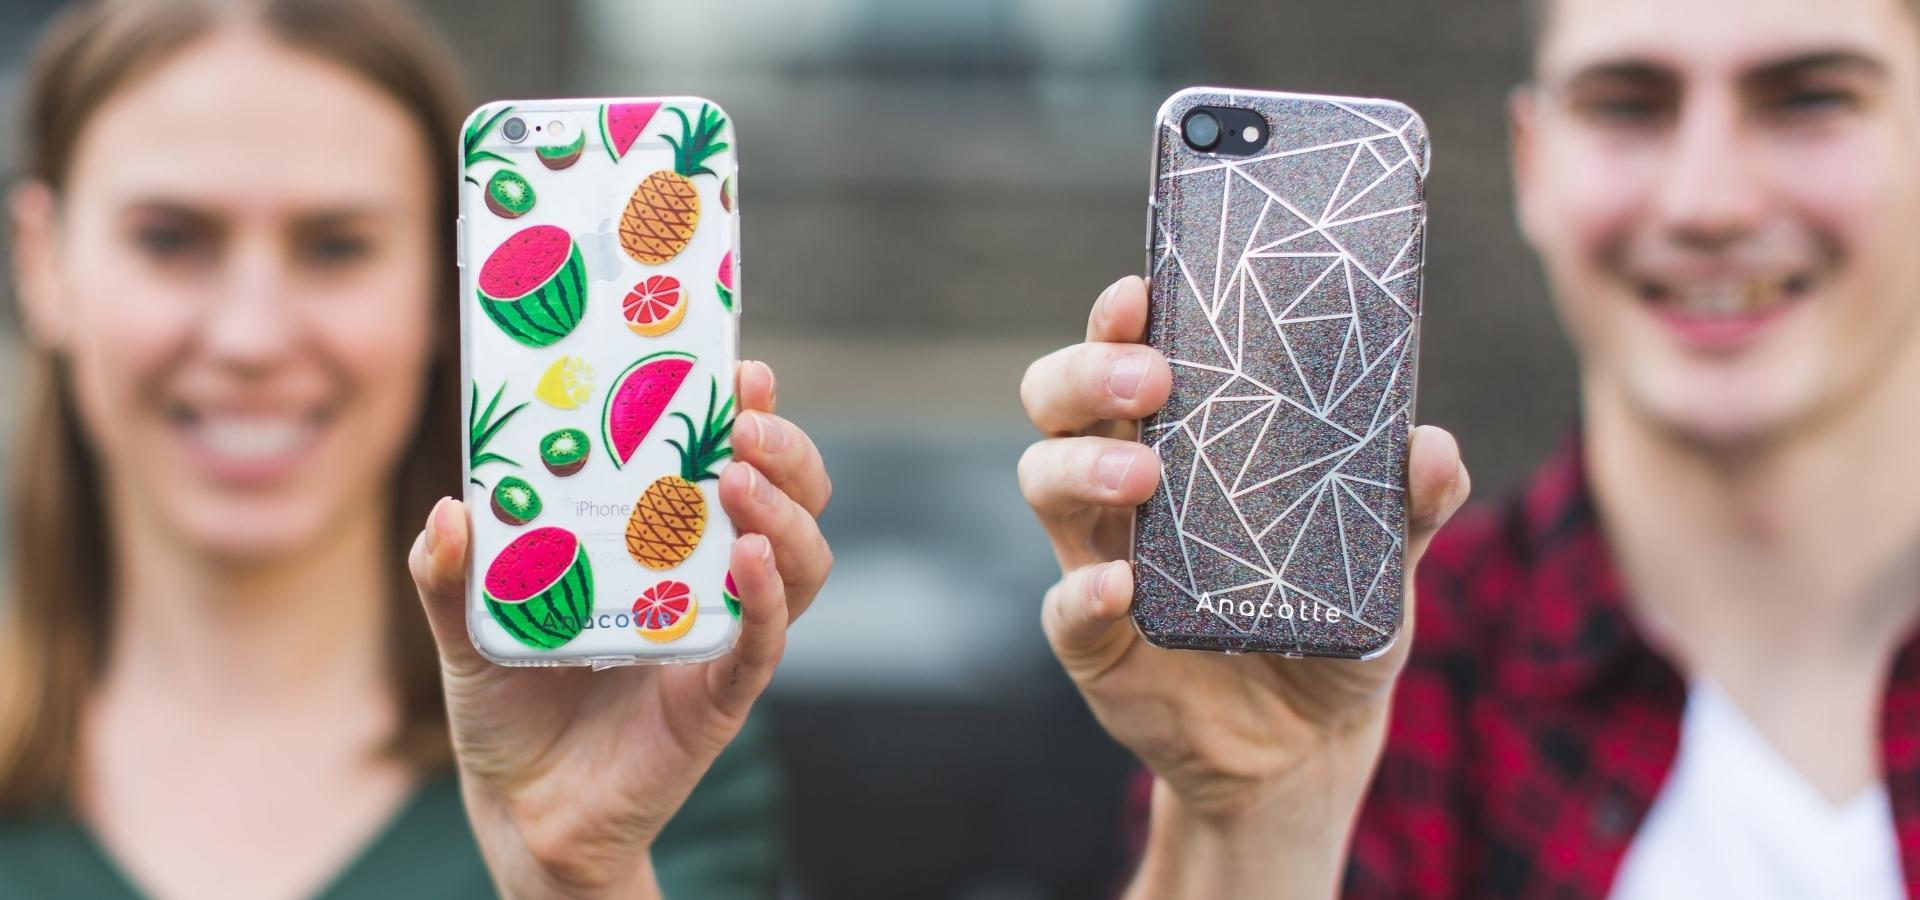 types-of-phone-cases-13-of-the-best-anacotte-phone-case-options